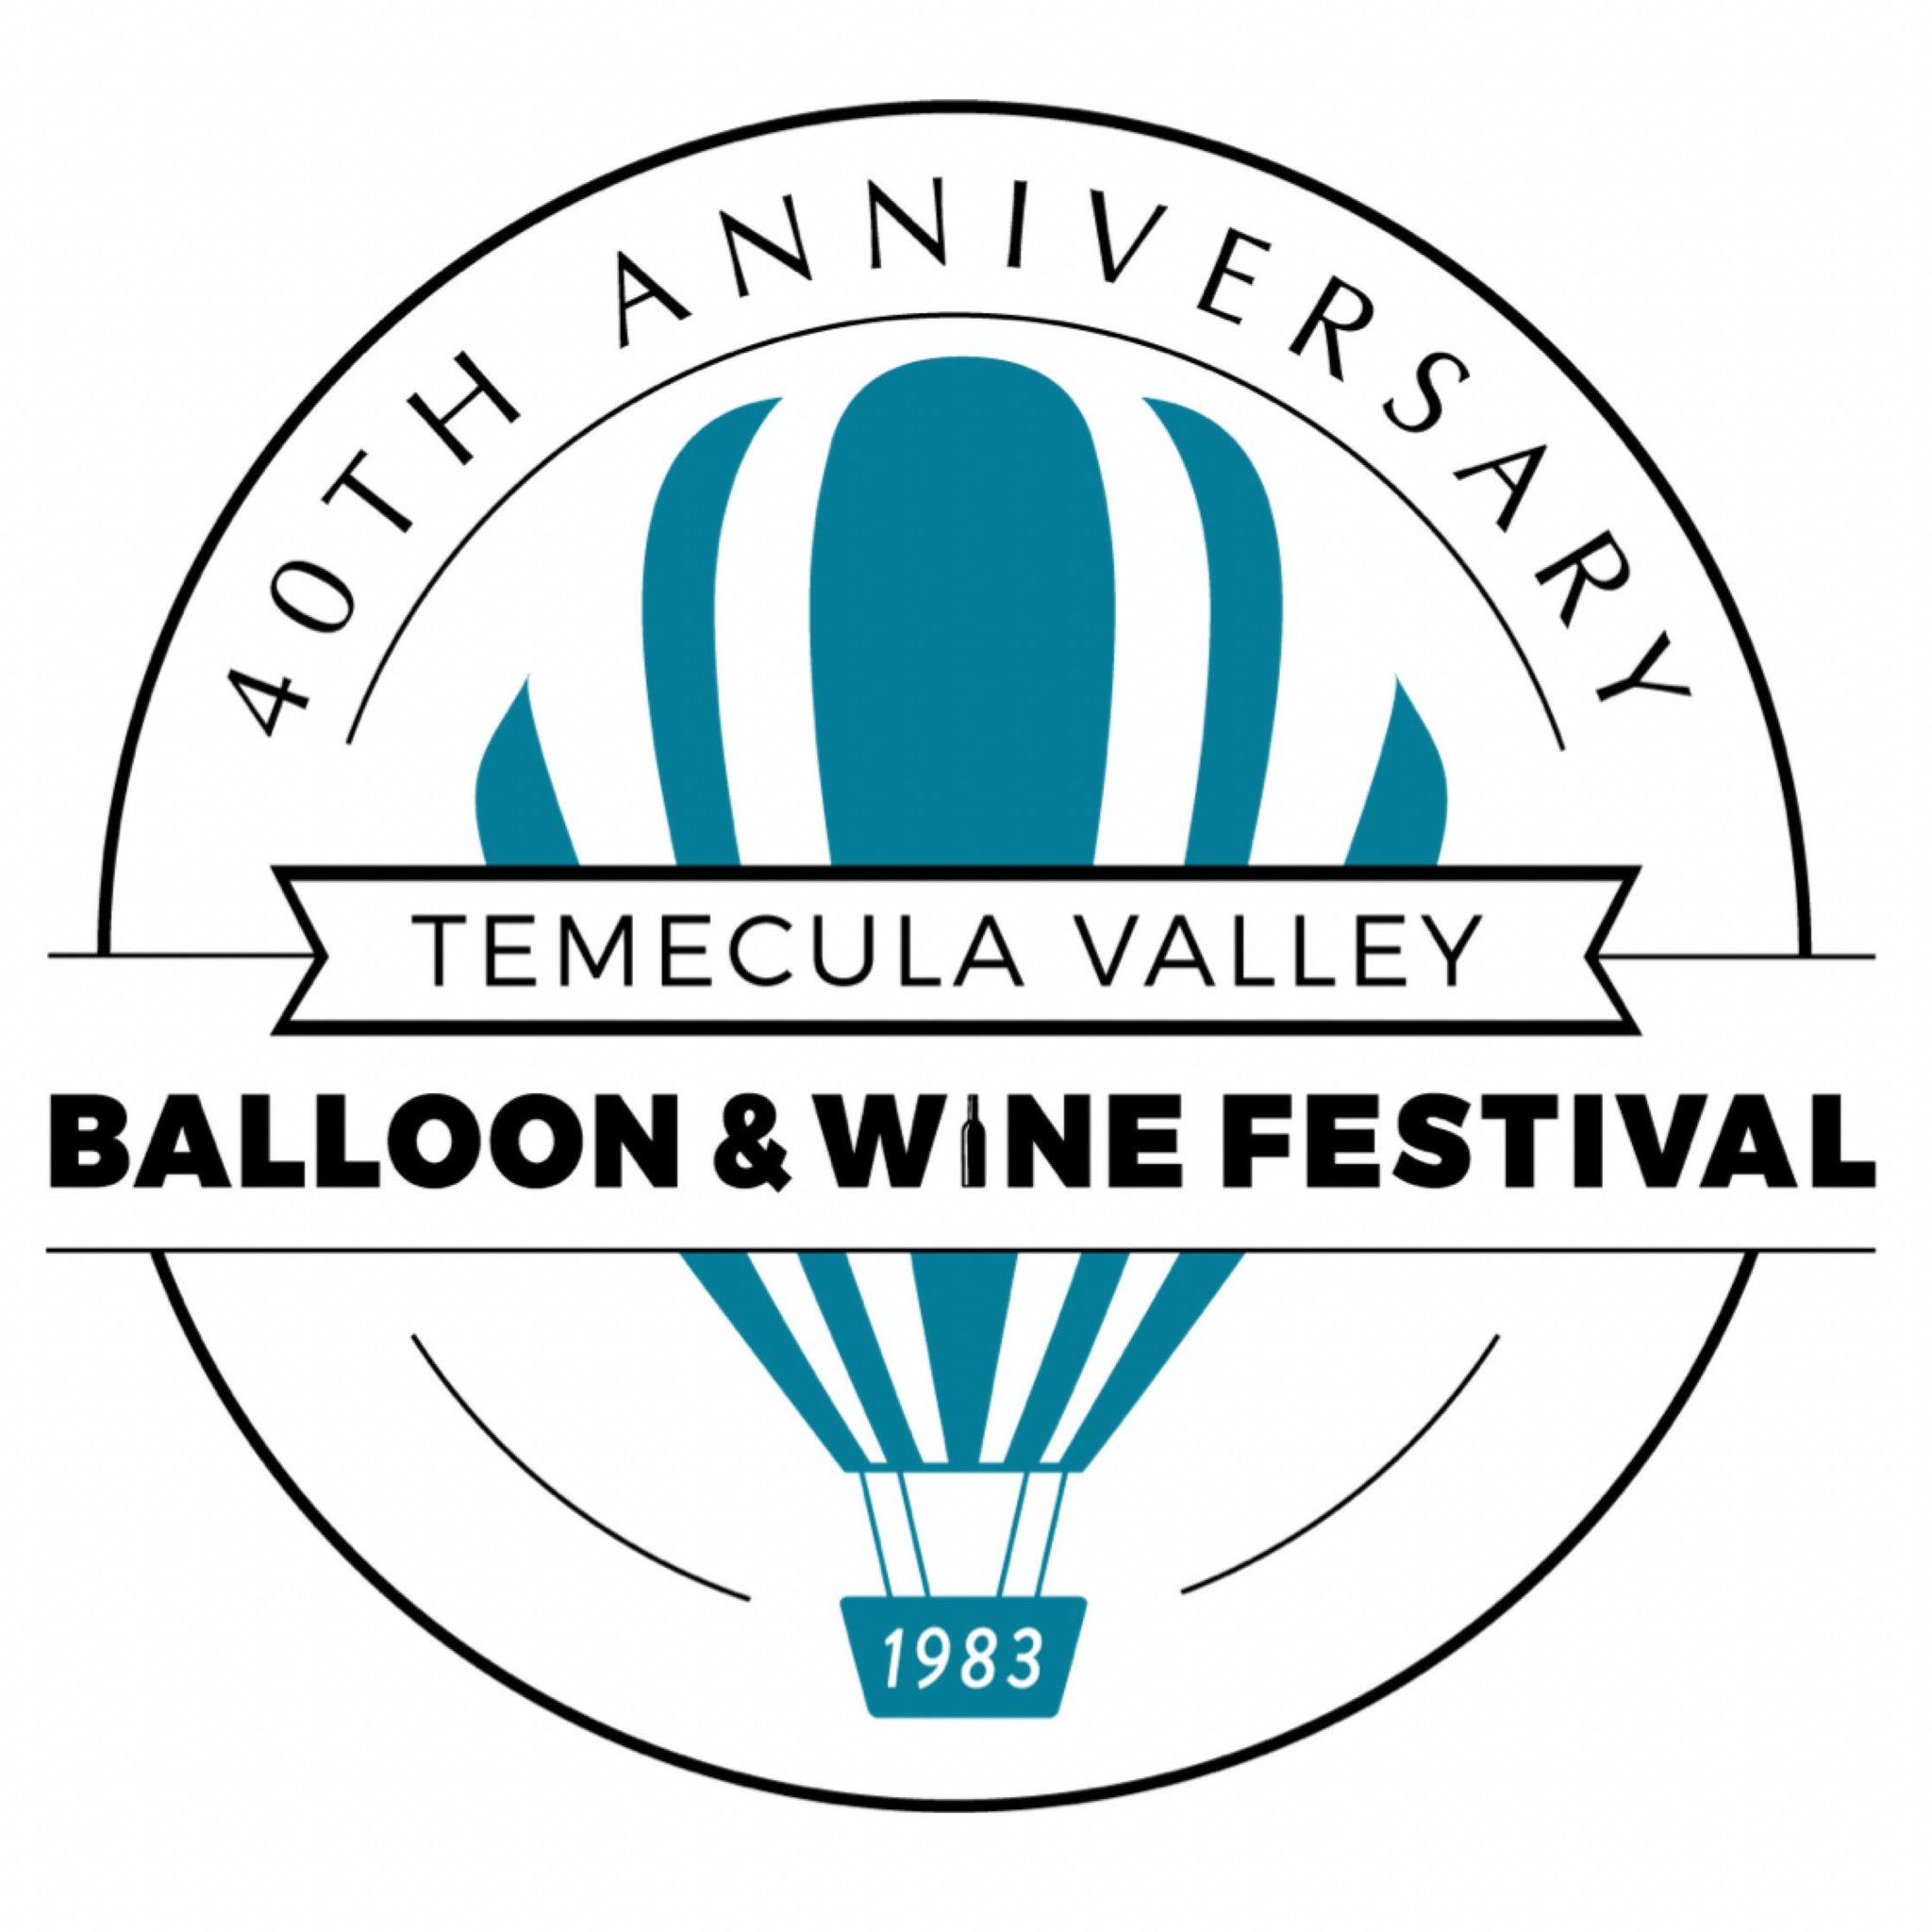 Temecula Valley Balloon & Wine Festival Festival Lineup, Dates and